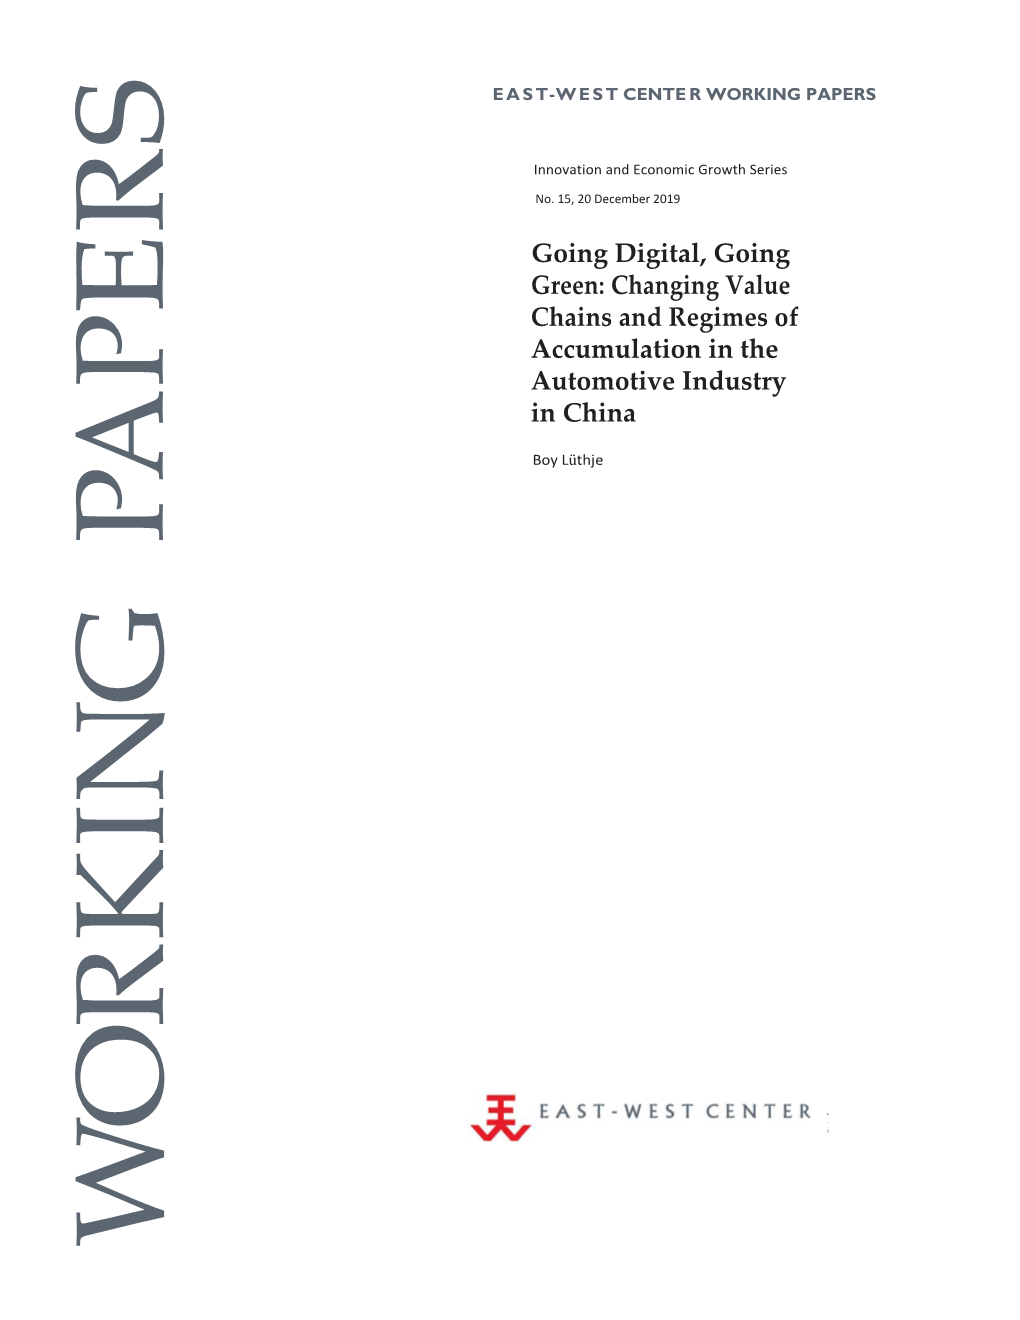 Going Digital, Going Green: Changing Value Chains and Regimes of Accumulation in the Automotive Industry in China